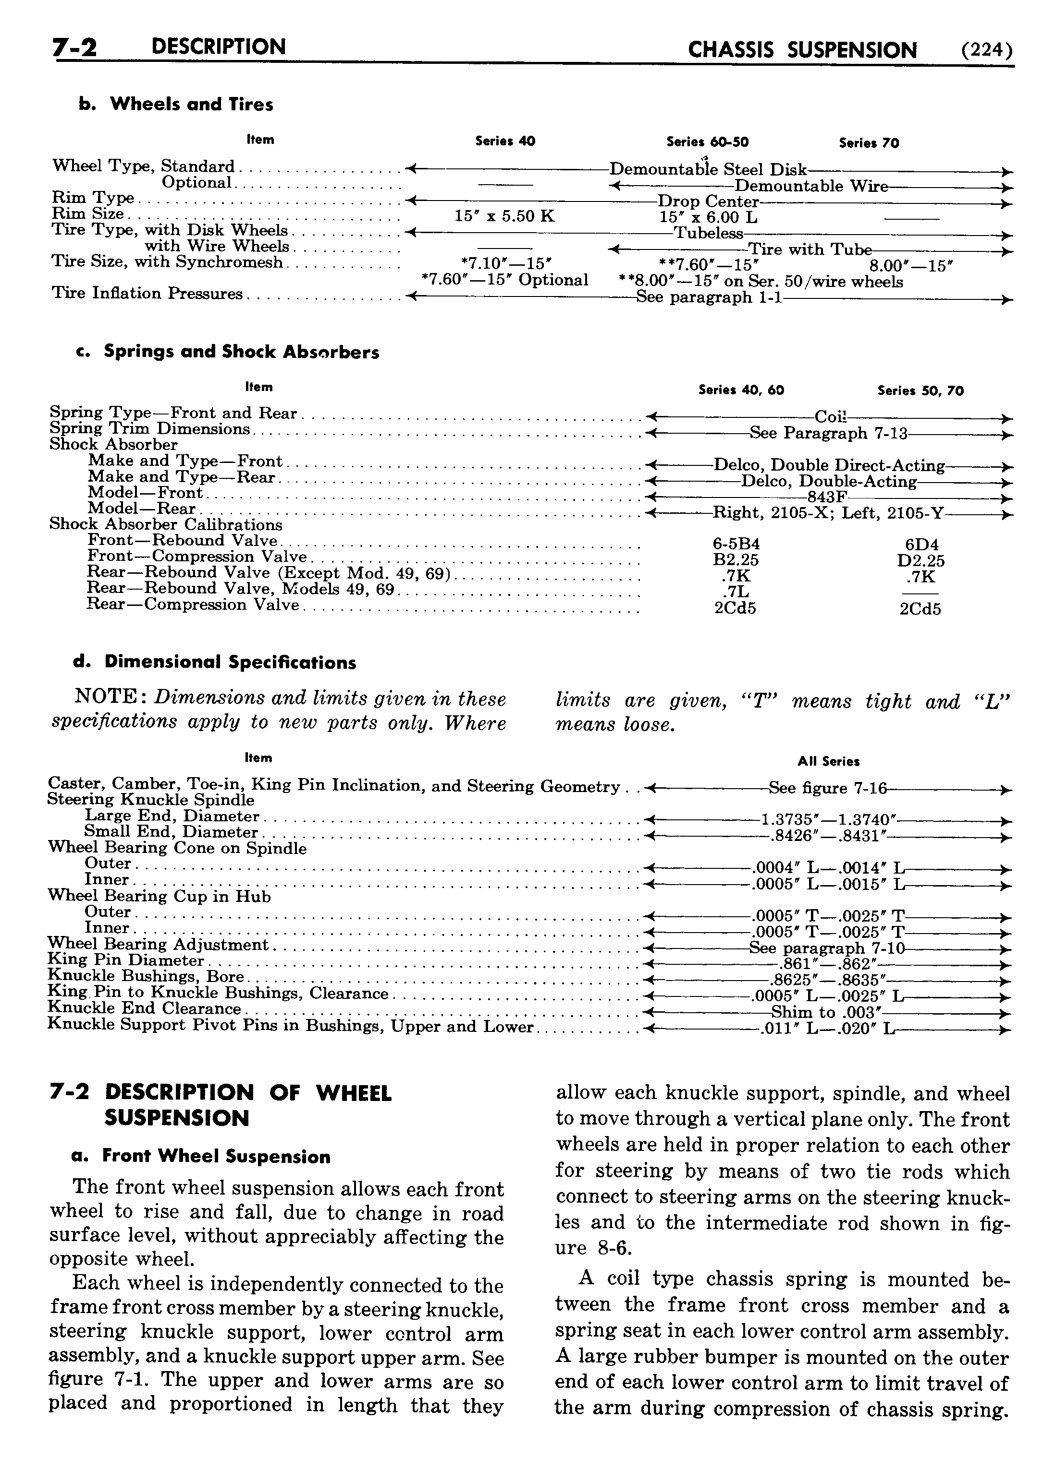 n_08 1955 Buick Shop Manual - Chassis Suspension-002-002.jpg